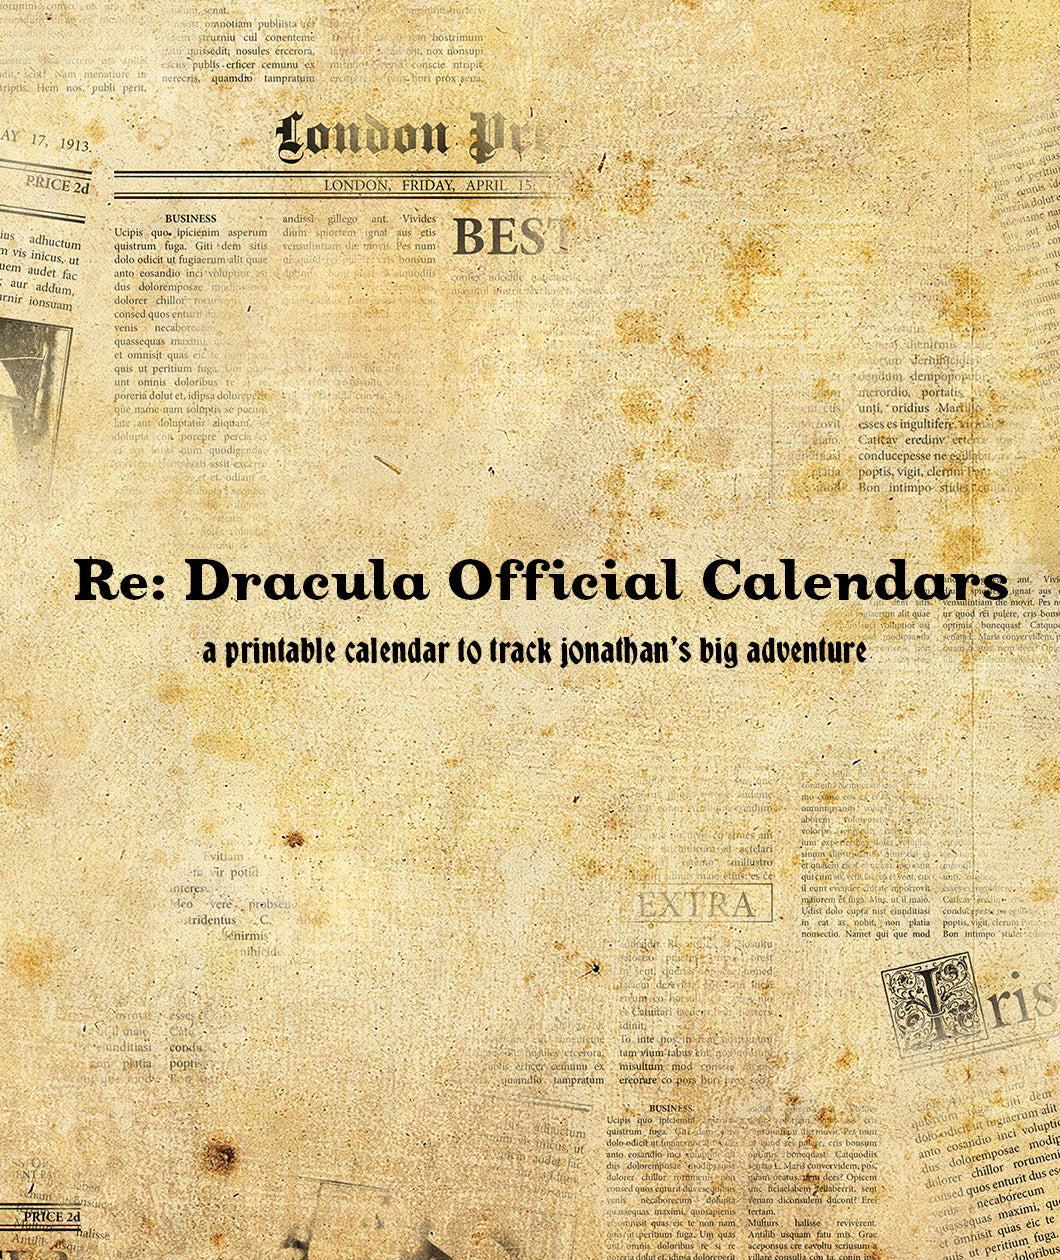 An old newspaper with faded text and a title that reads "Re: Dracula Official Calendars; a printable calendar 10 track jonathan's big adventure". 